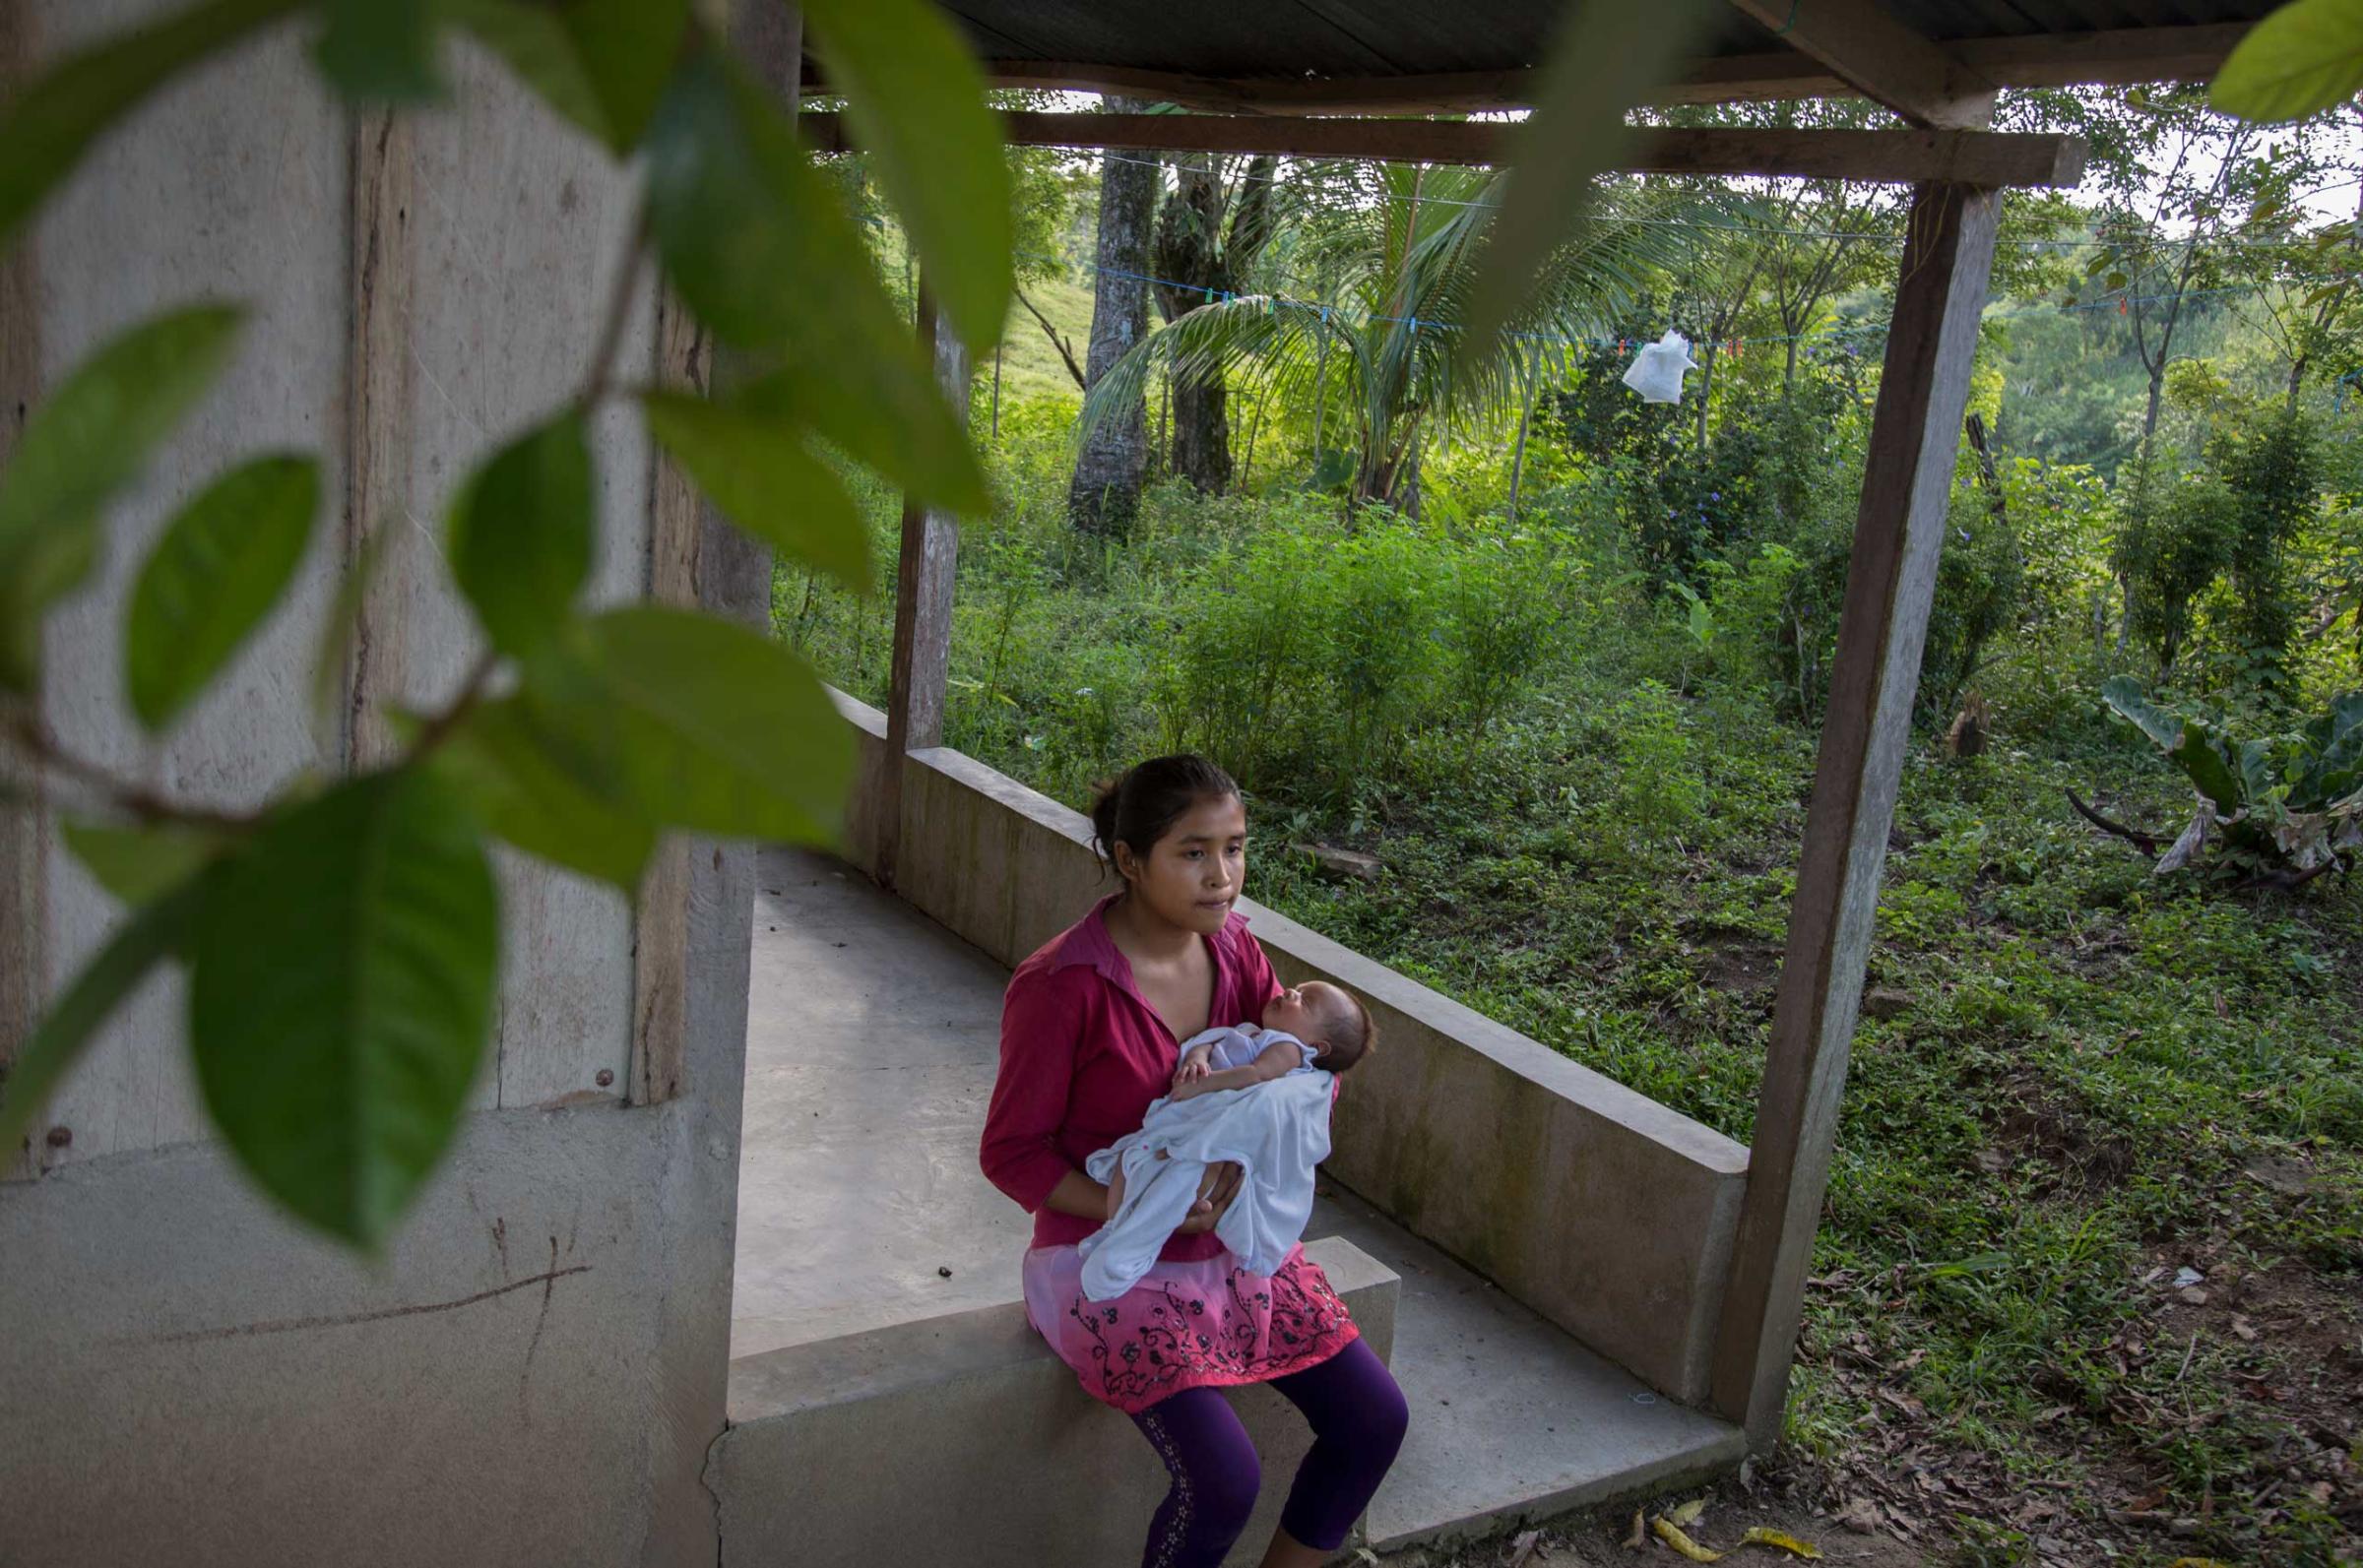 Child Marriage in Guatemala